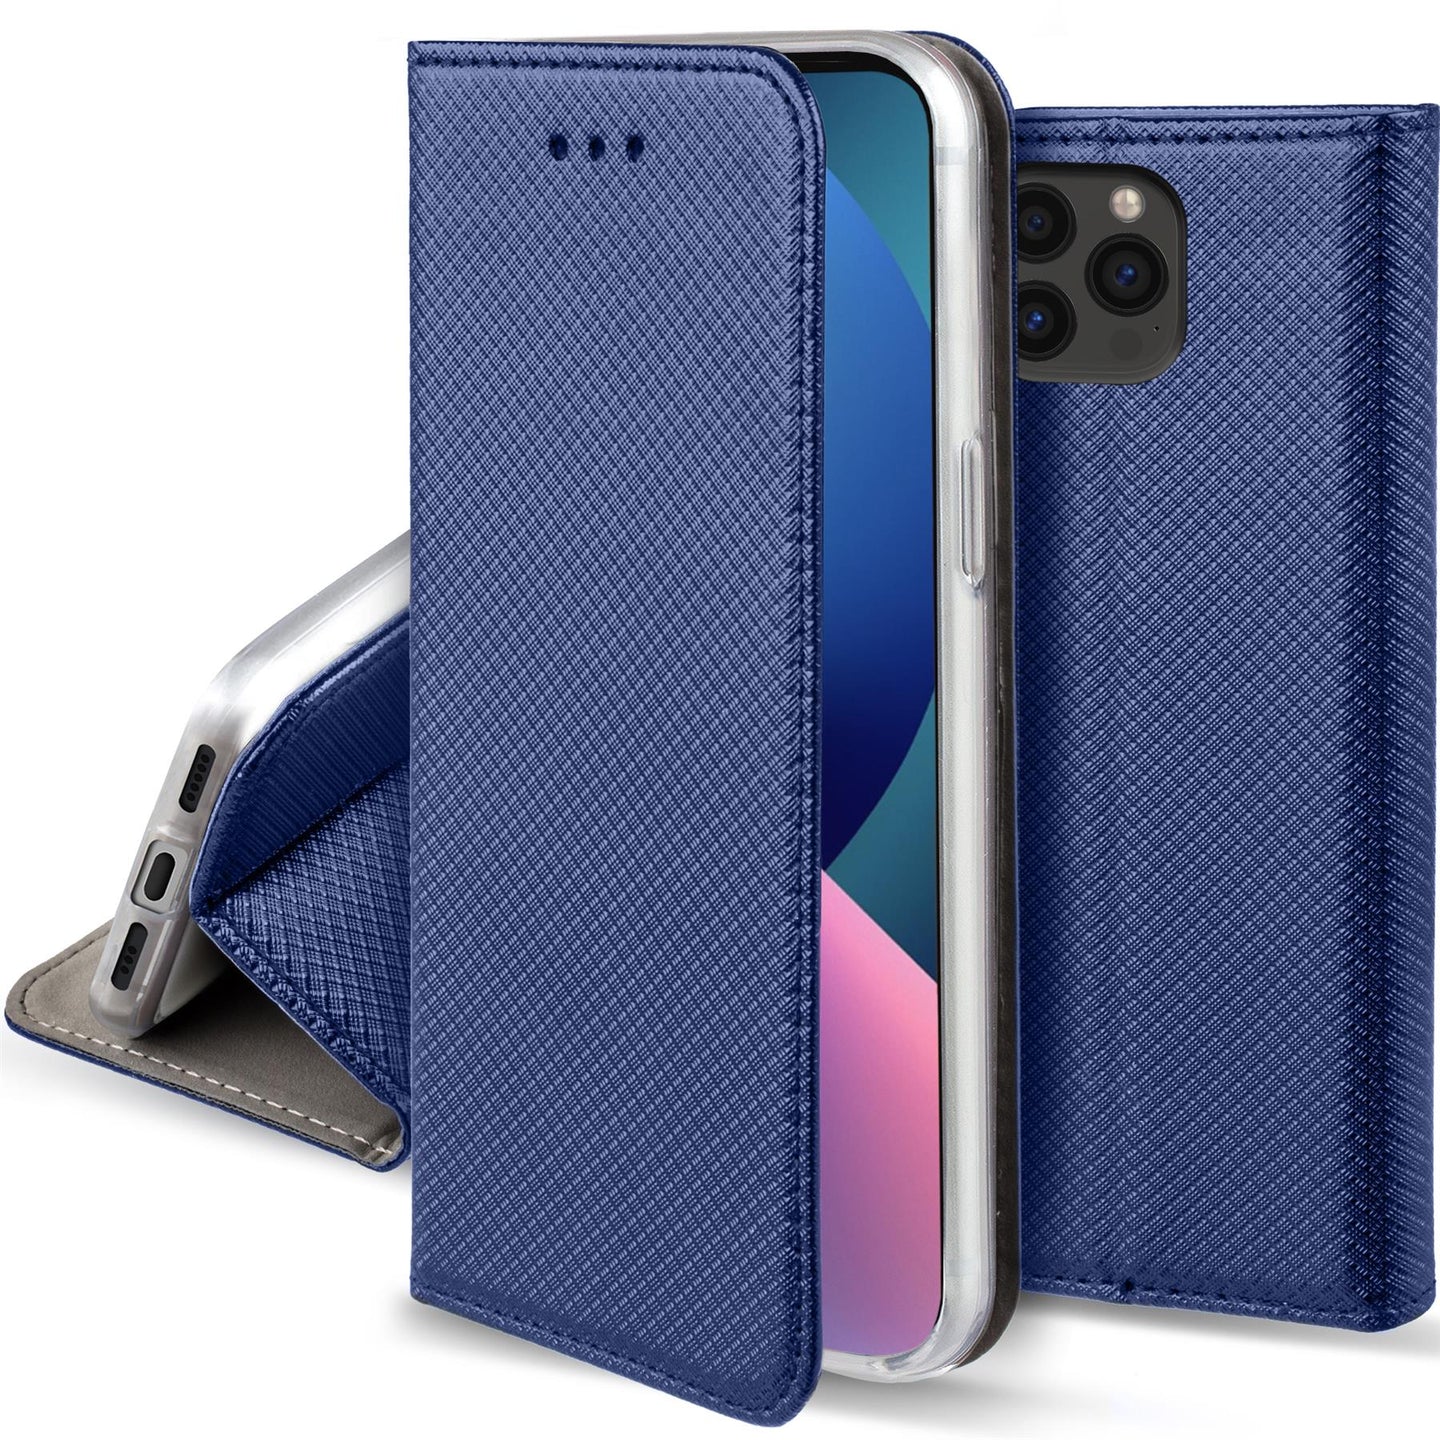 Moozy Case Flip Cover for iPhone 13 Pro, Dark Blue - Smart Magnetic Flip Case Flip Folio Wallet Case with Card Holder and Stand, Credit Card Slots